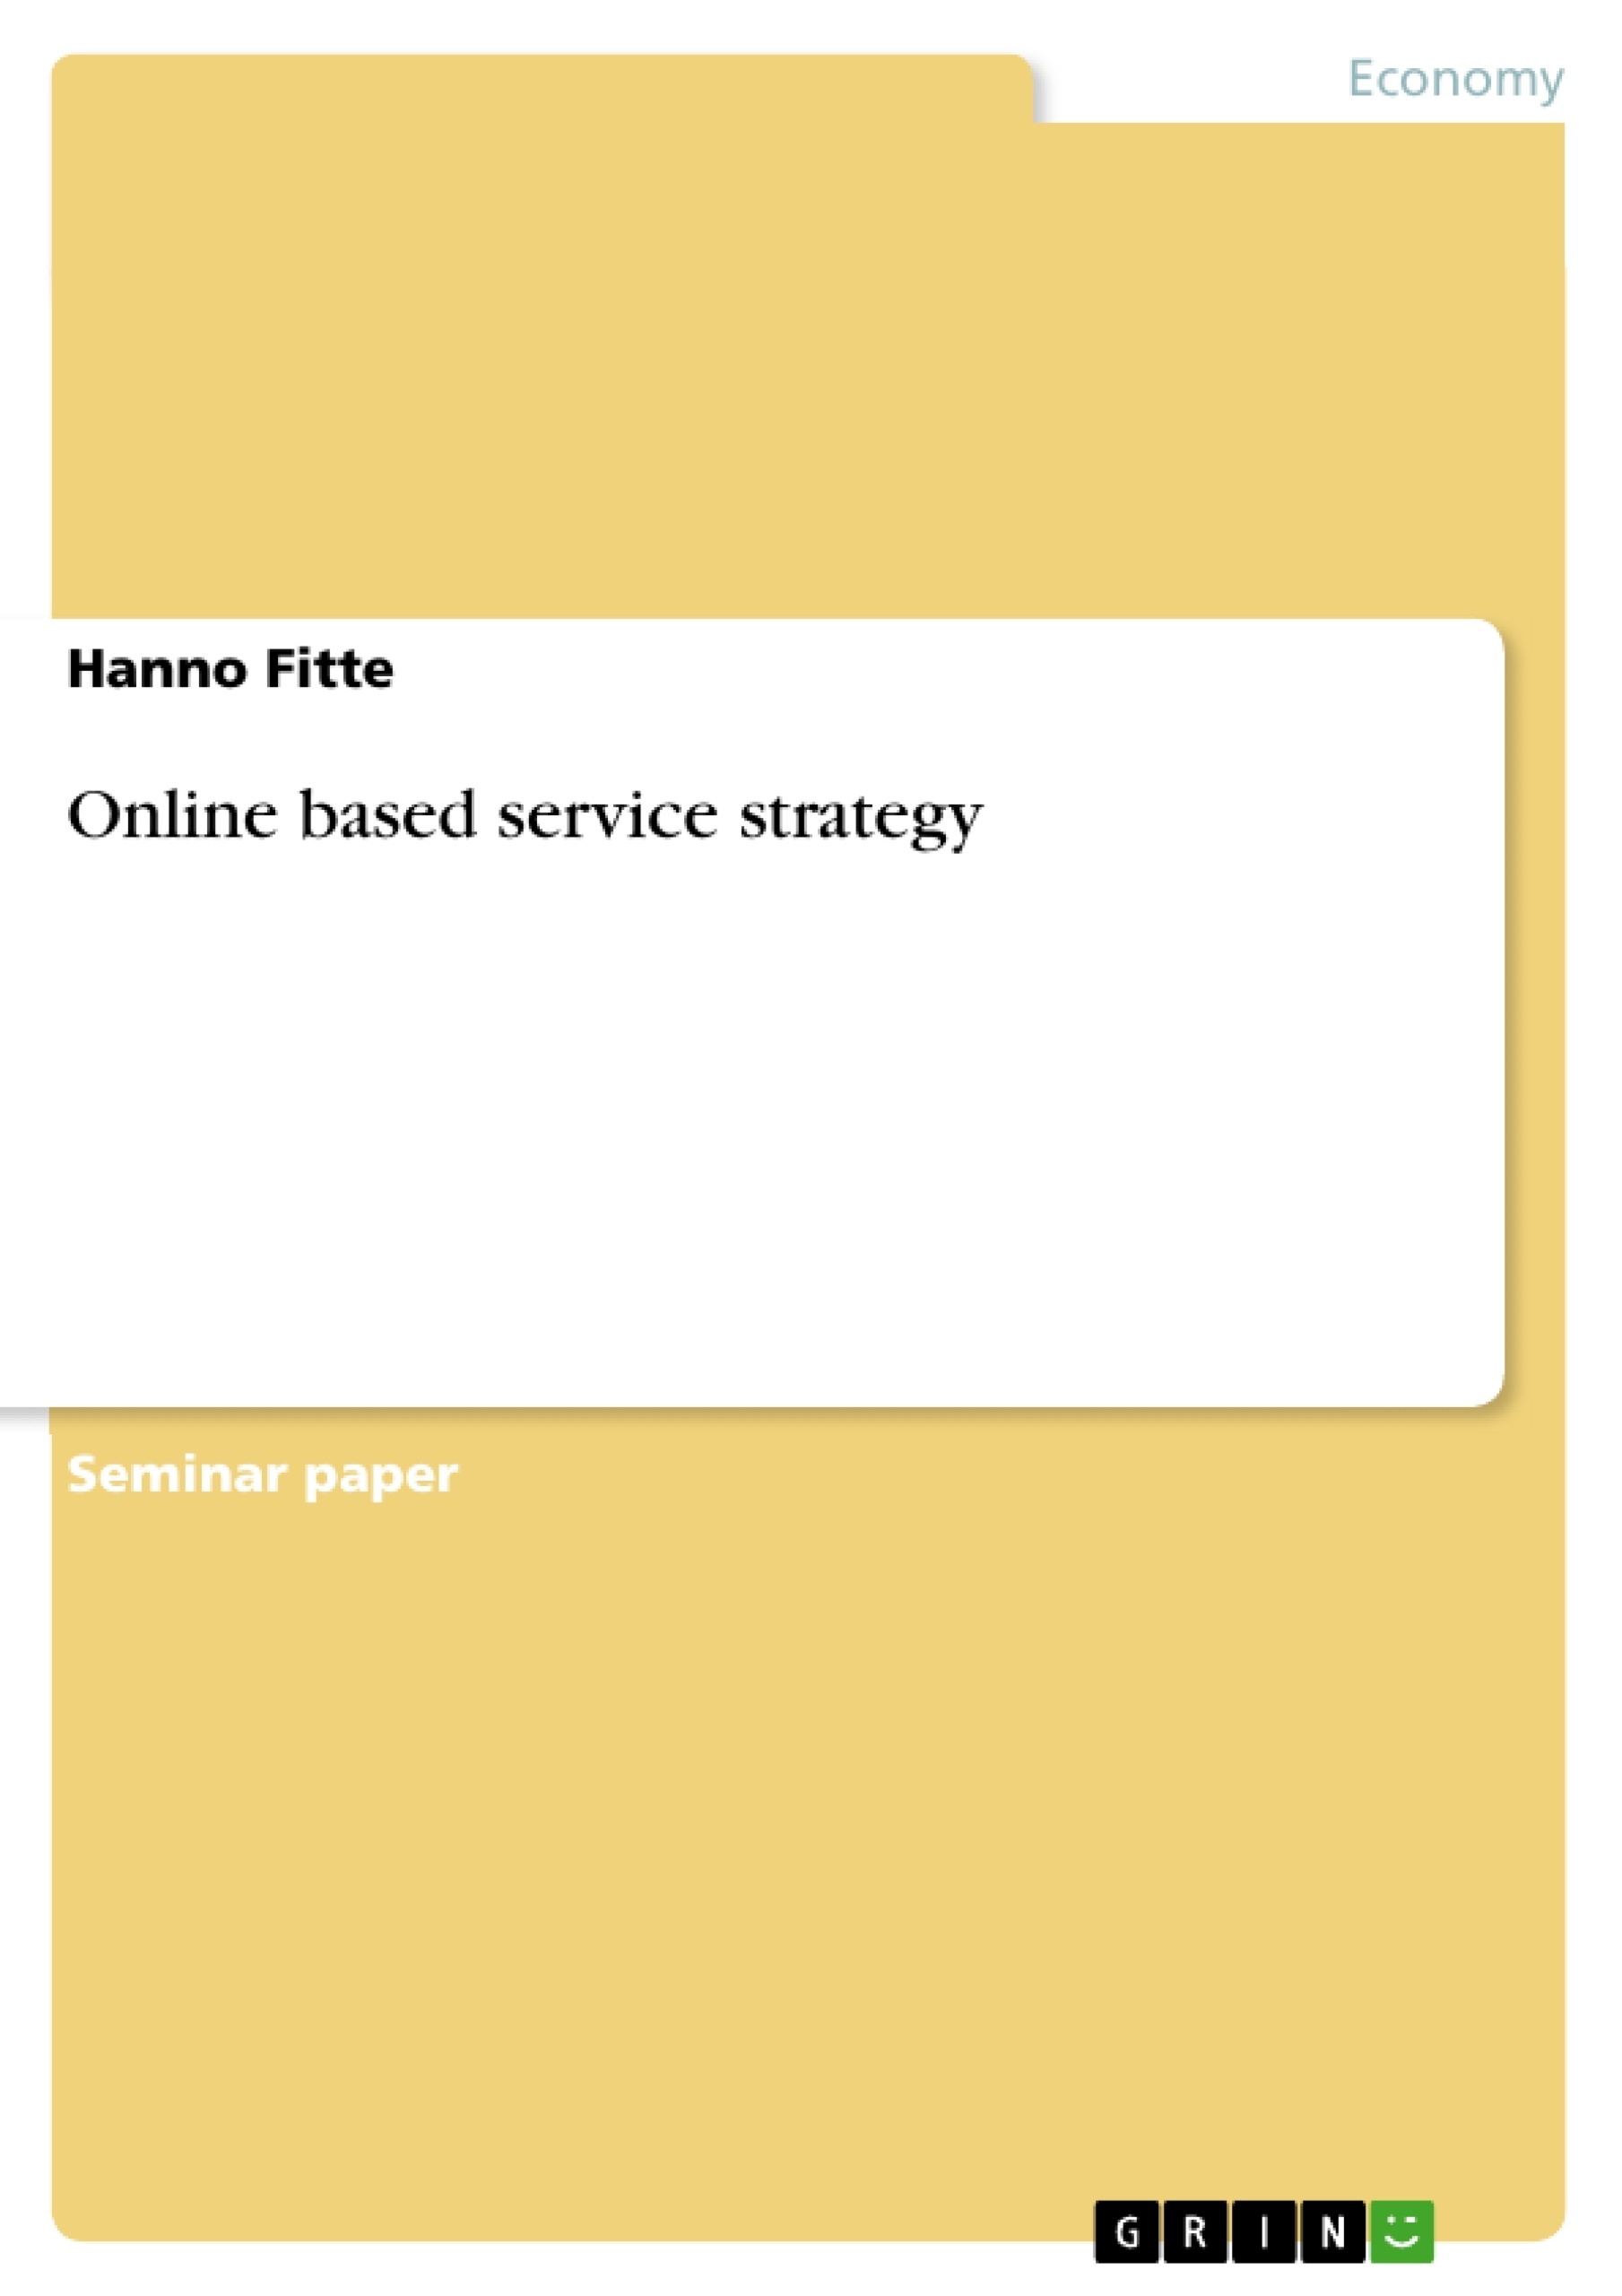 Title: Online based service strategy